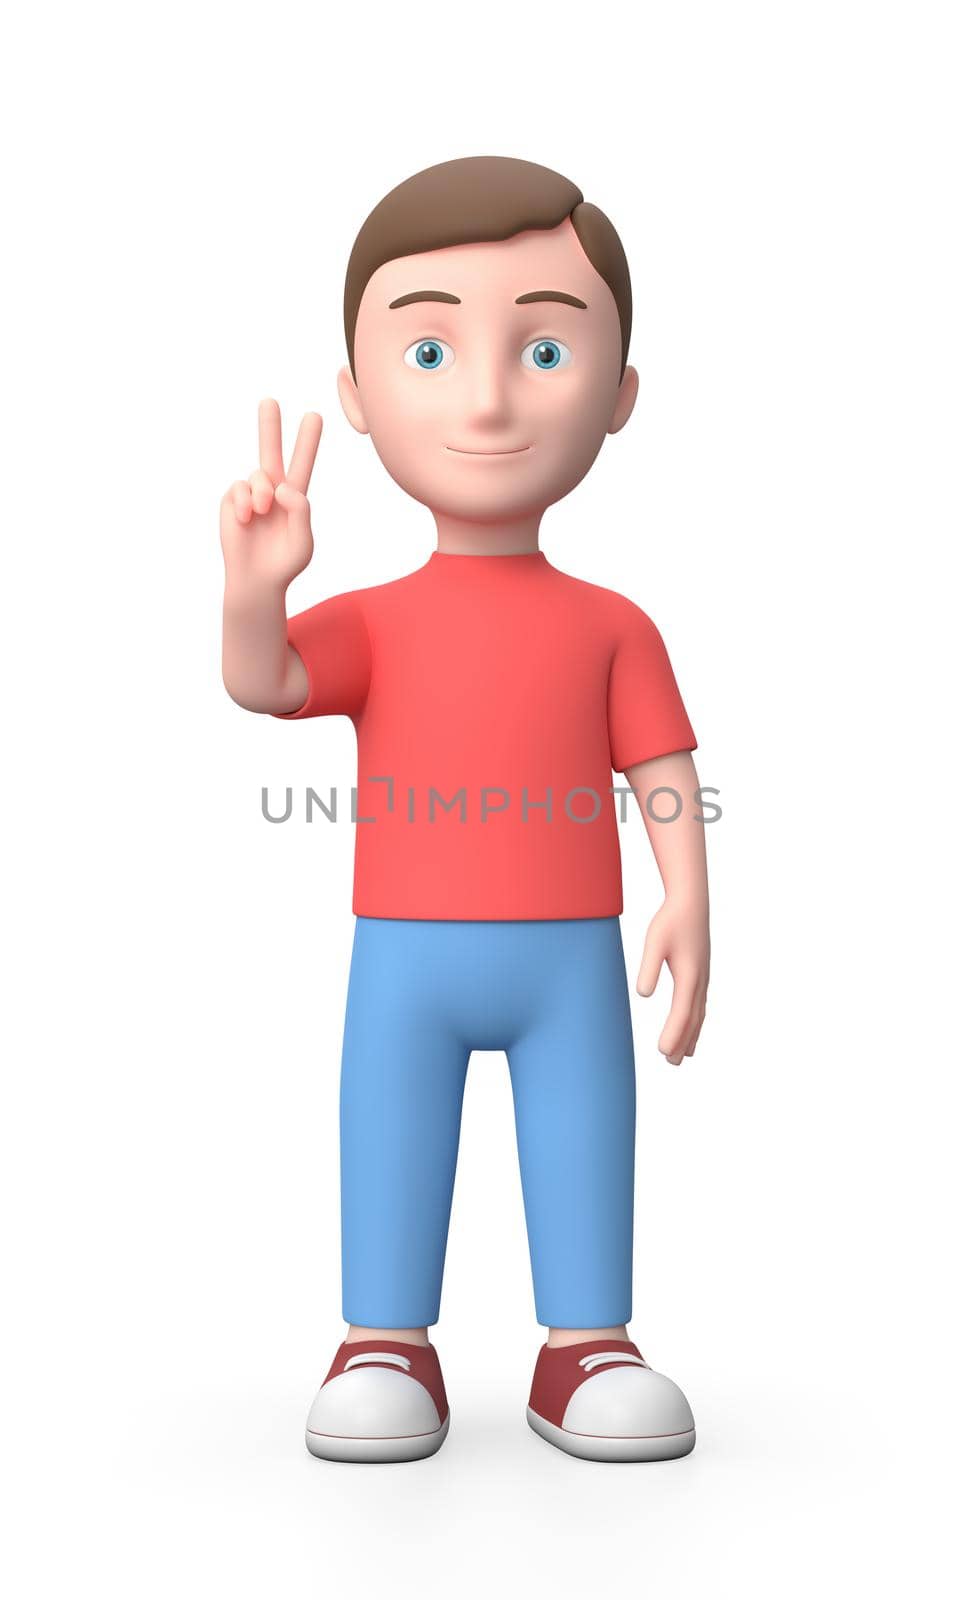 Standing Young Boy Smiling and Showing V Sign. 3D Cartoon Character. Isolated on White Background 3D Illustration, Victory Concept